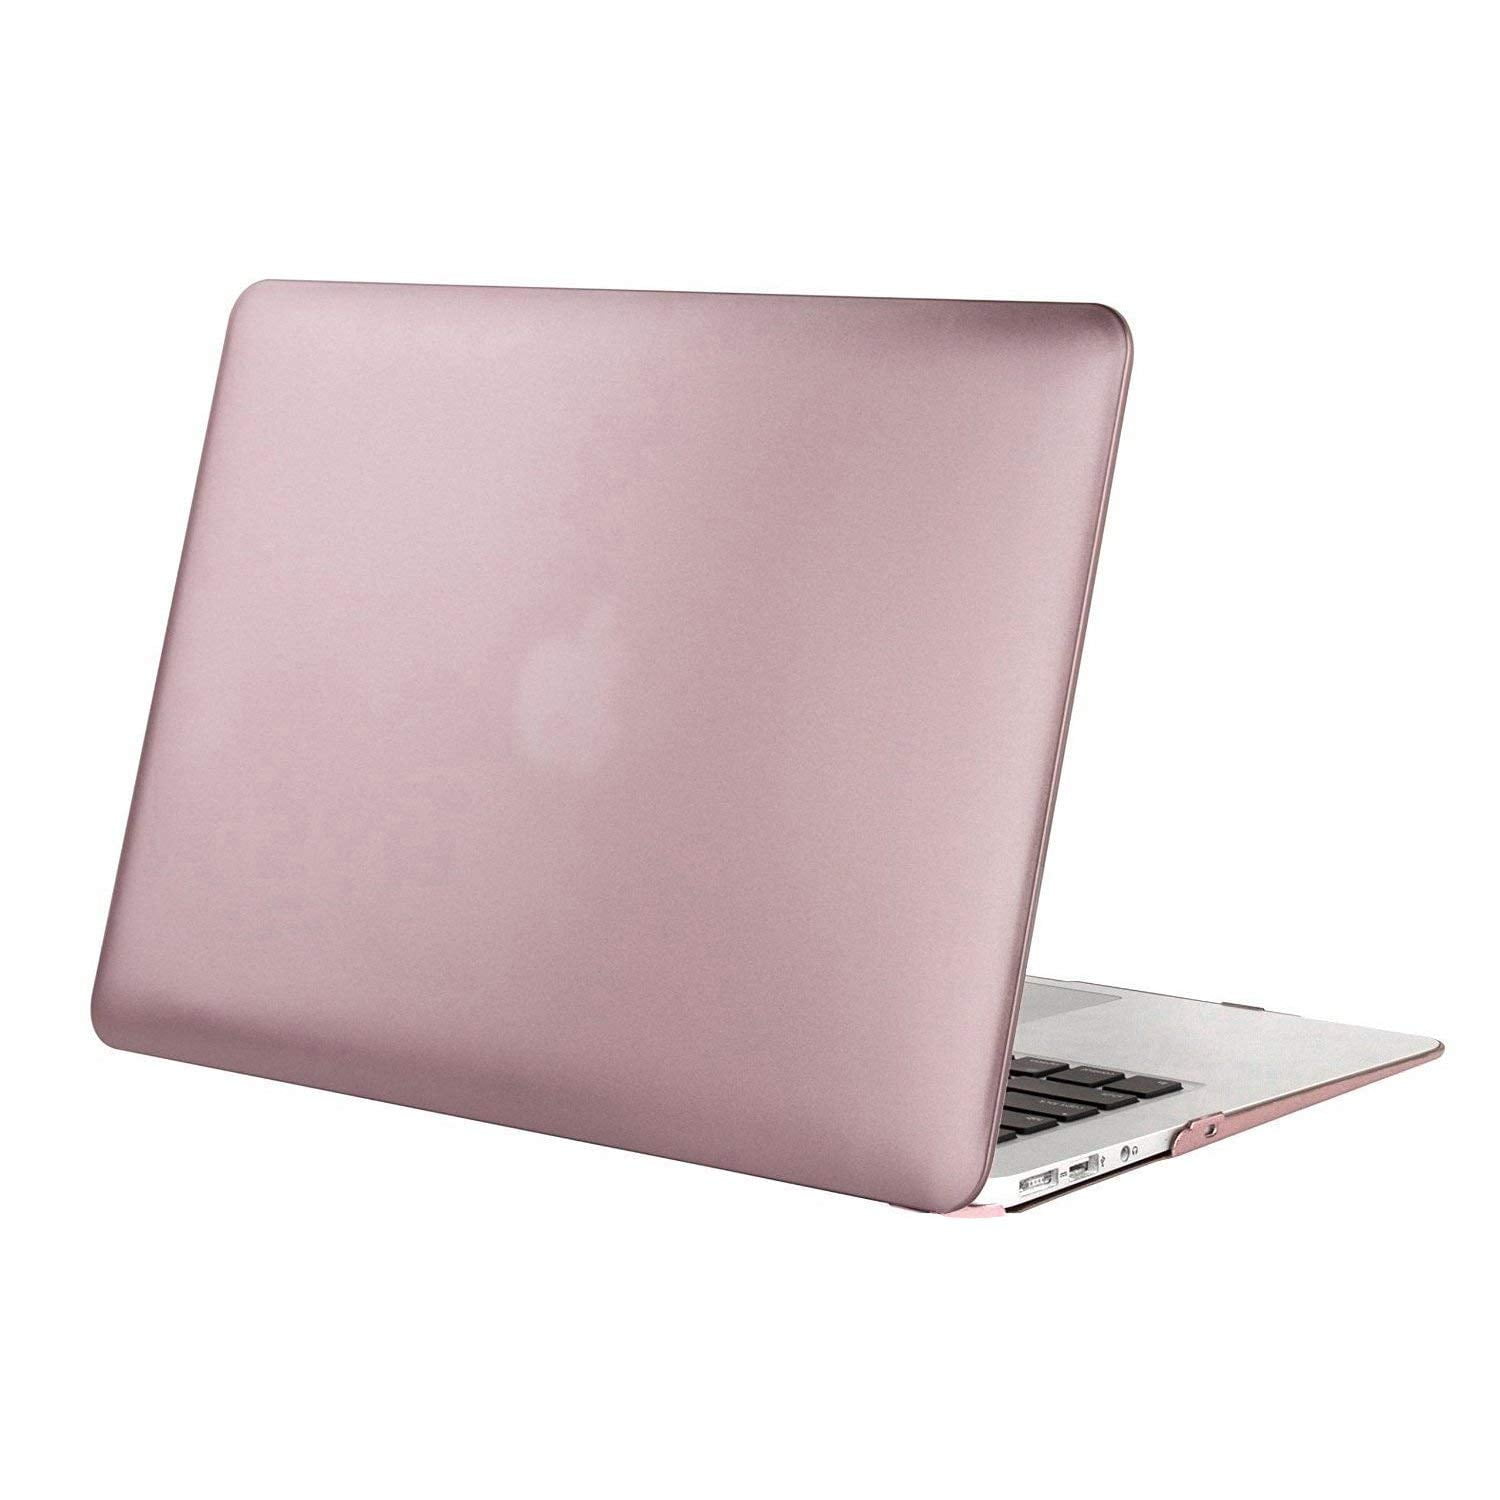 Mosiso Laptop Plastic Hard Cover Case for Macbook Air 13 inch